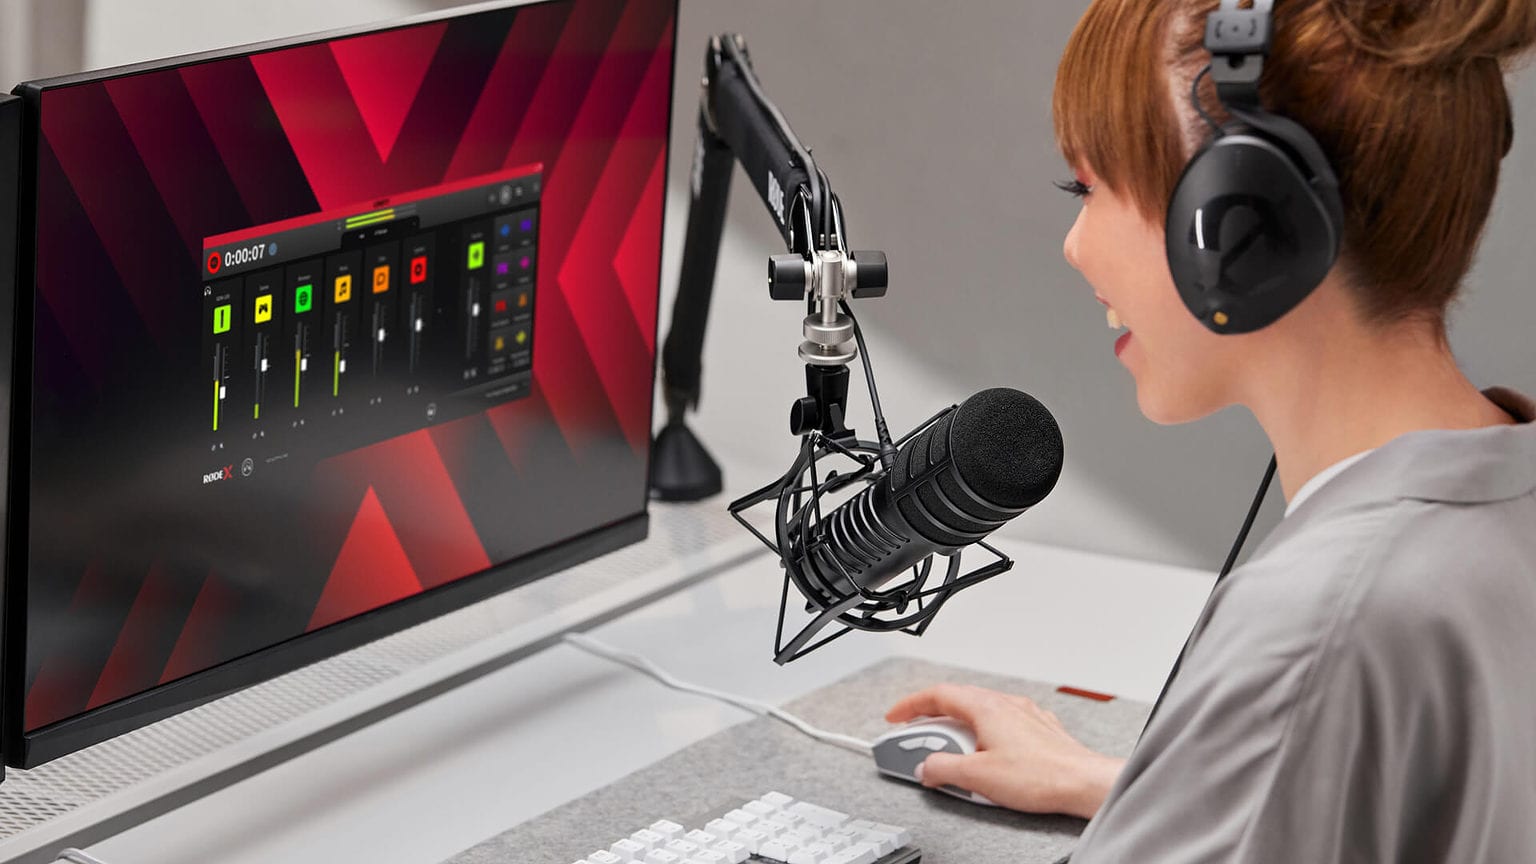 The new Rode X brand offers two USB mics for streamers and gamers, plus software.